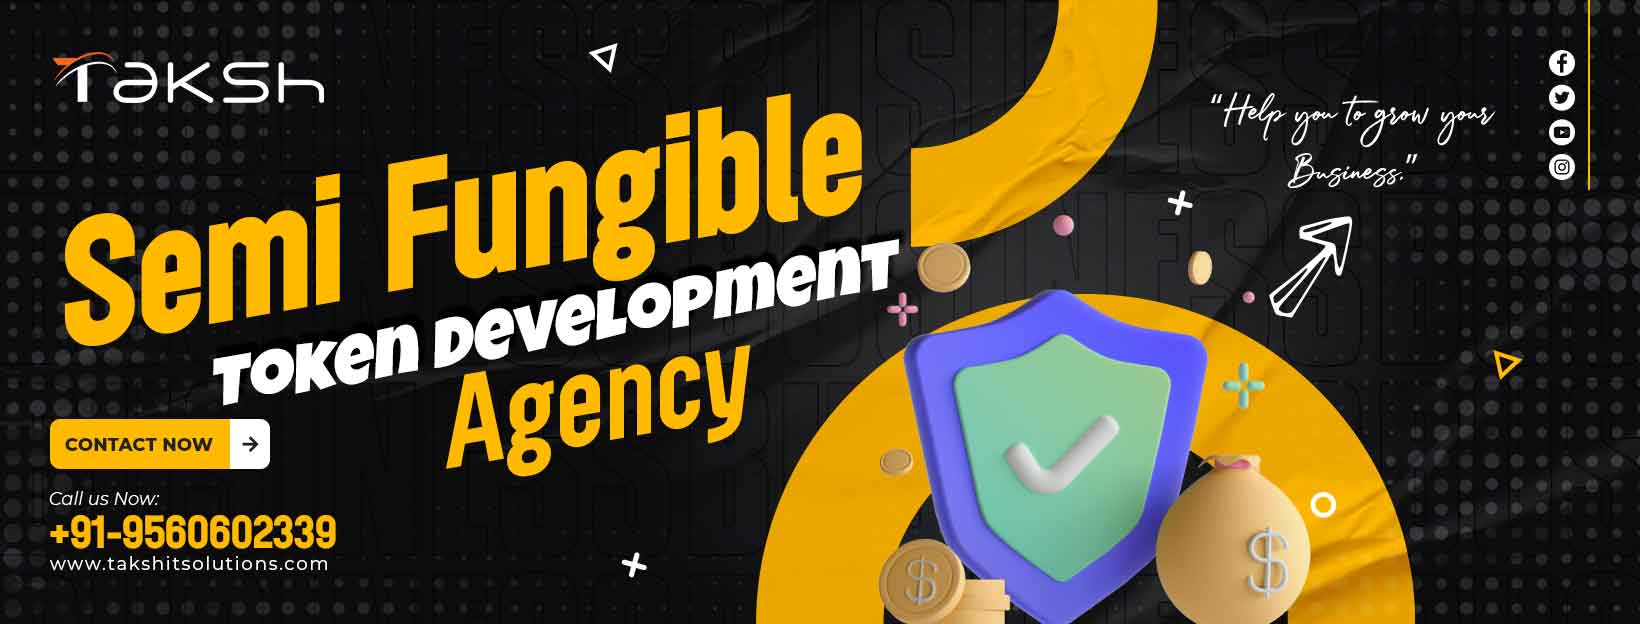 Semi Fungible Token Development Agency in Delhi: Taksh IT Solutions Private Limited